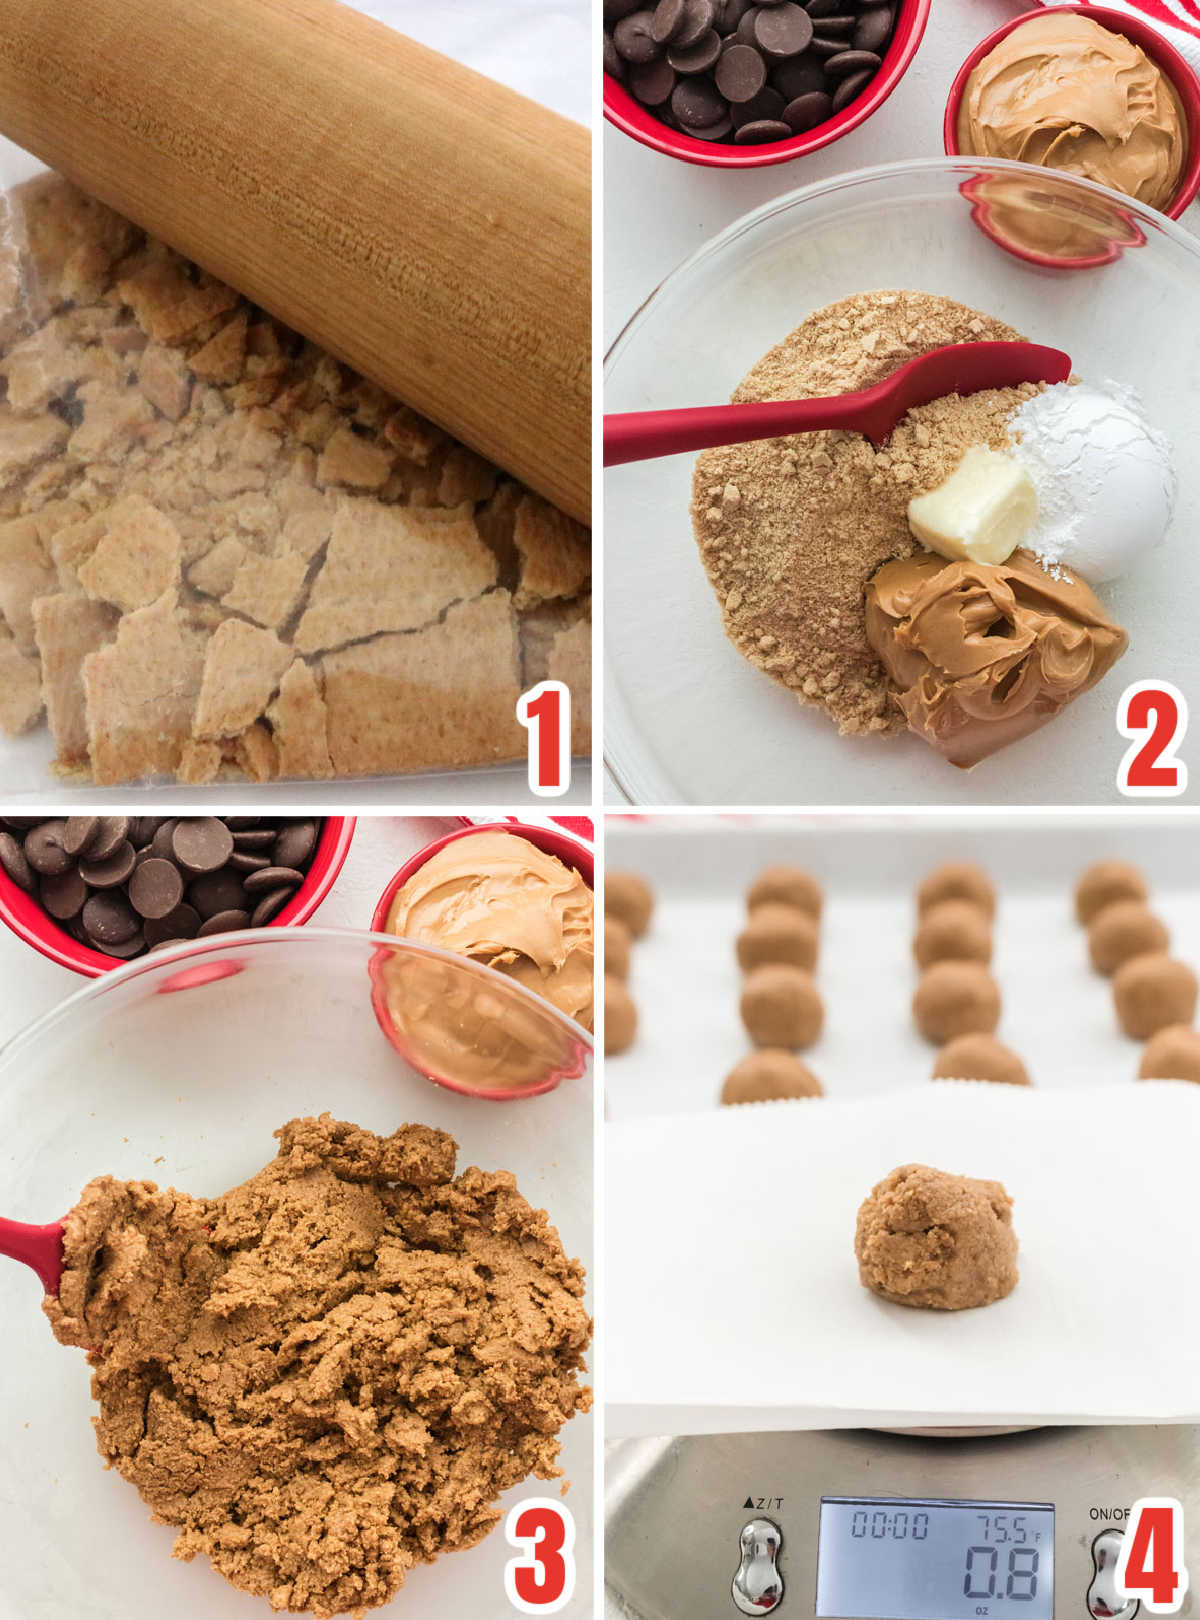 Collage image showing the steps for making the filling for the Peanut Butter candies.